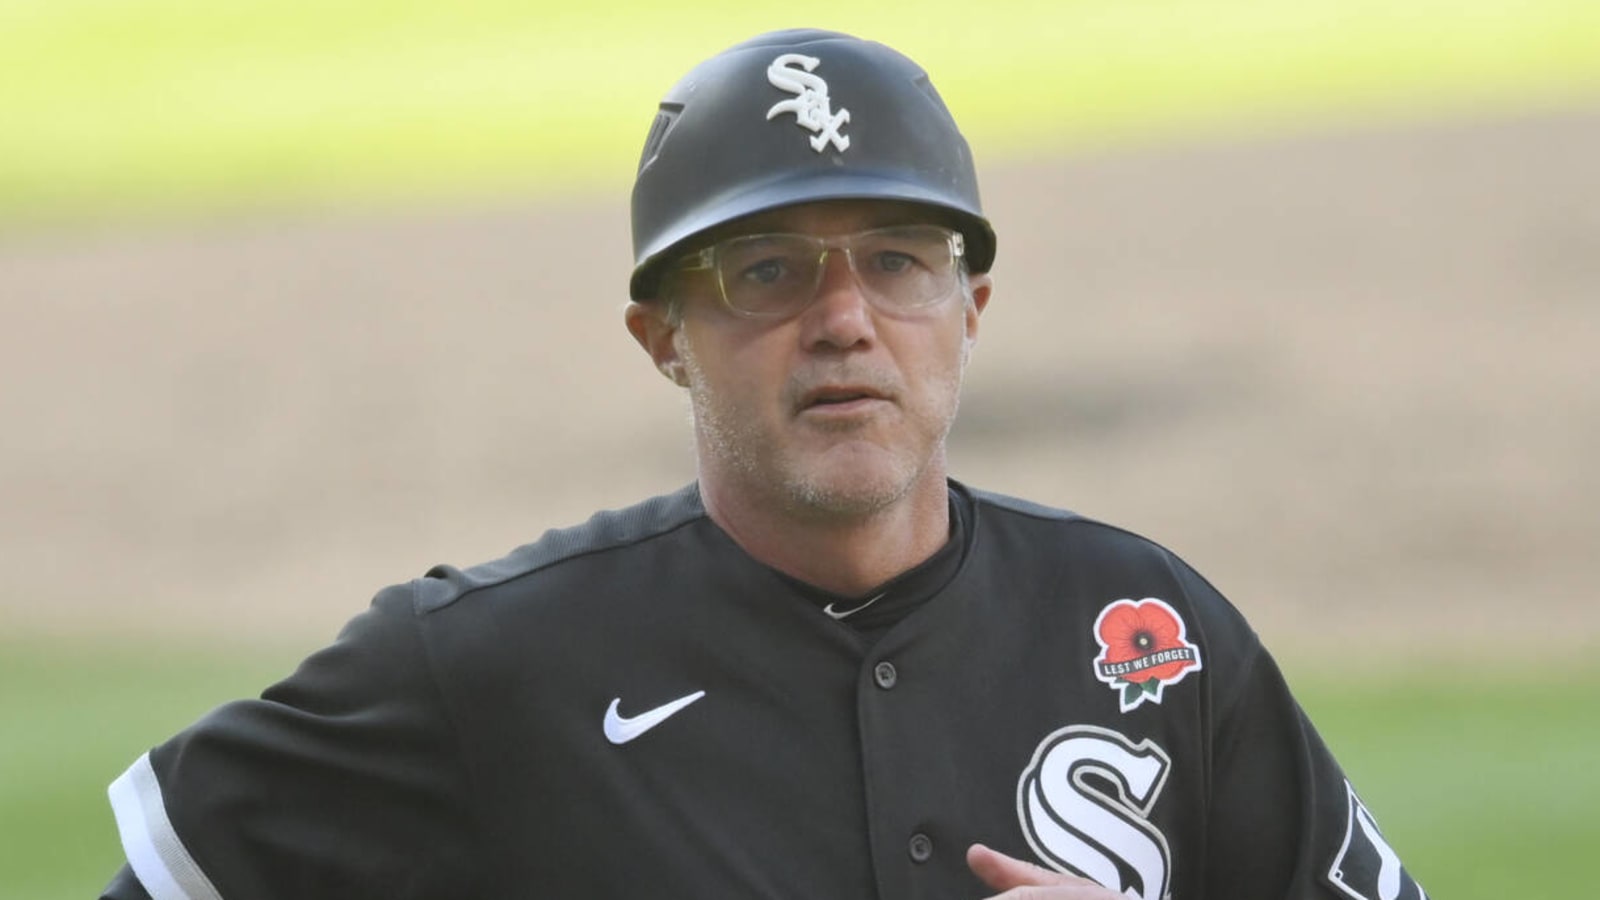 Joe McEwing will serve as Bench Coach for the 2023 season, replacing Matt  Holliday who has resigned the post. : r/Cardinals